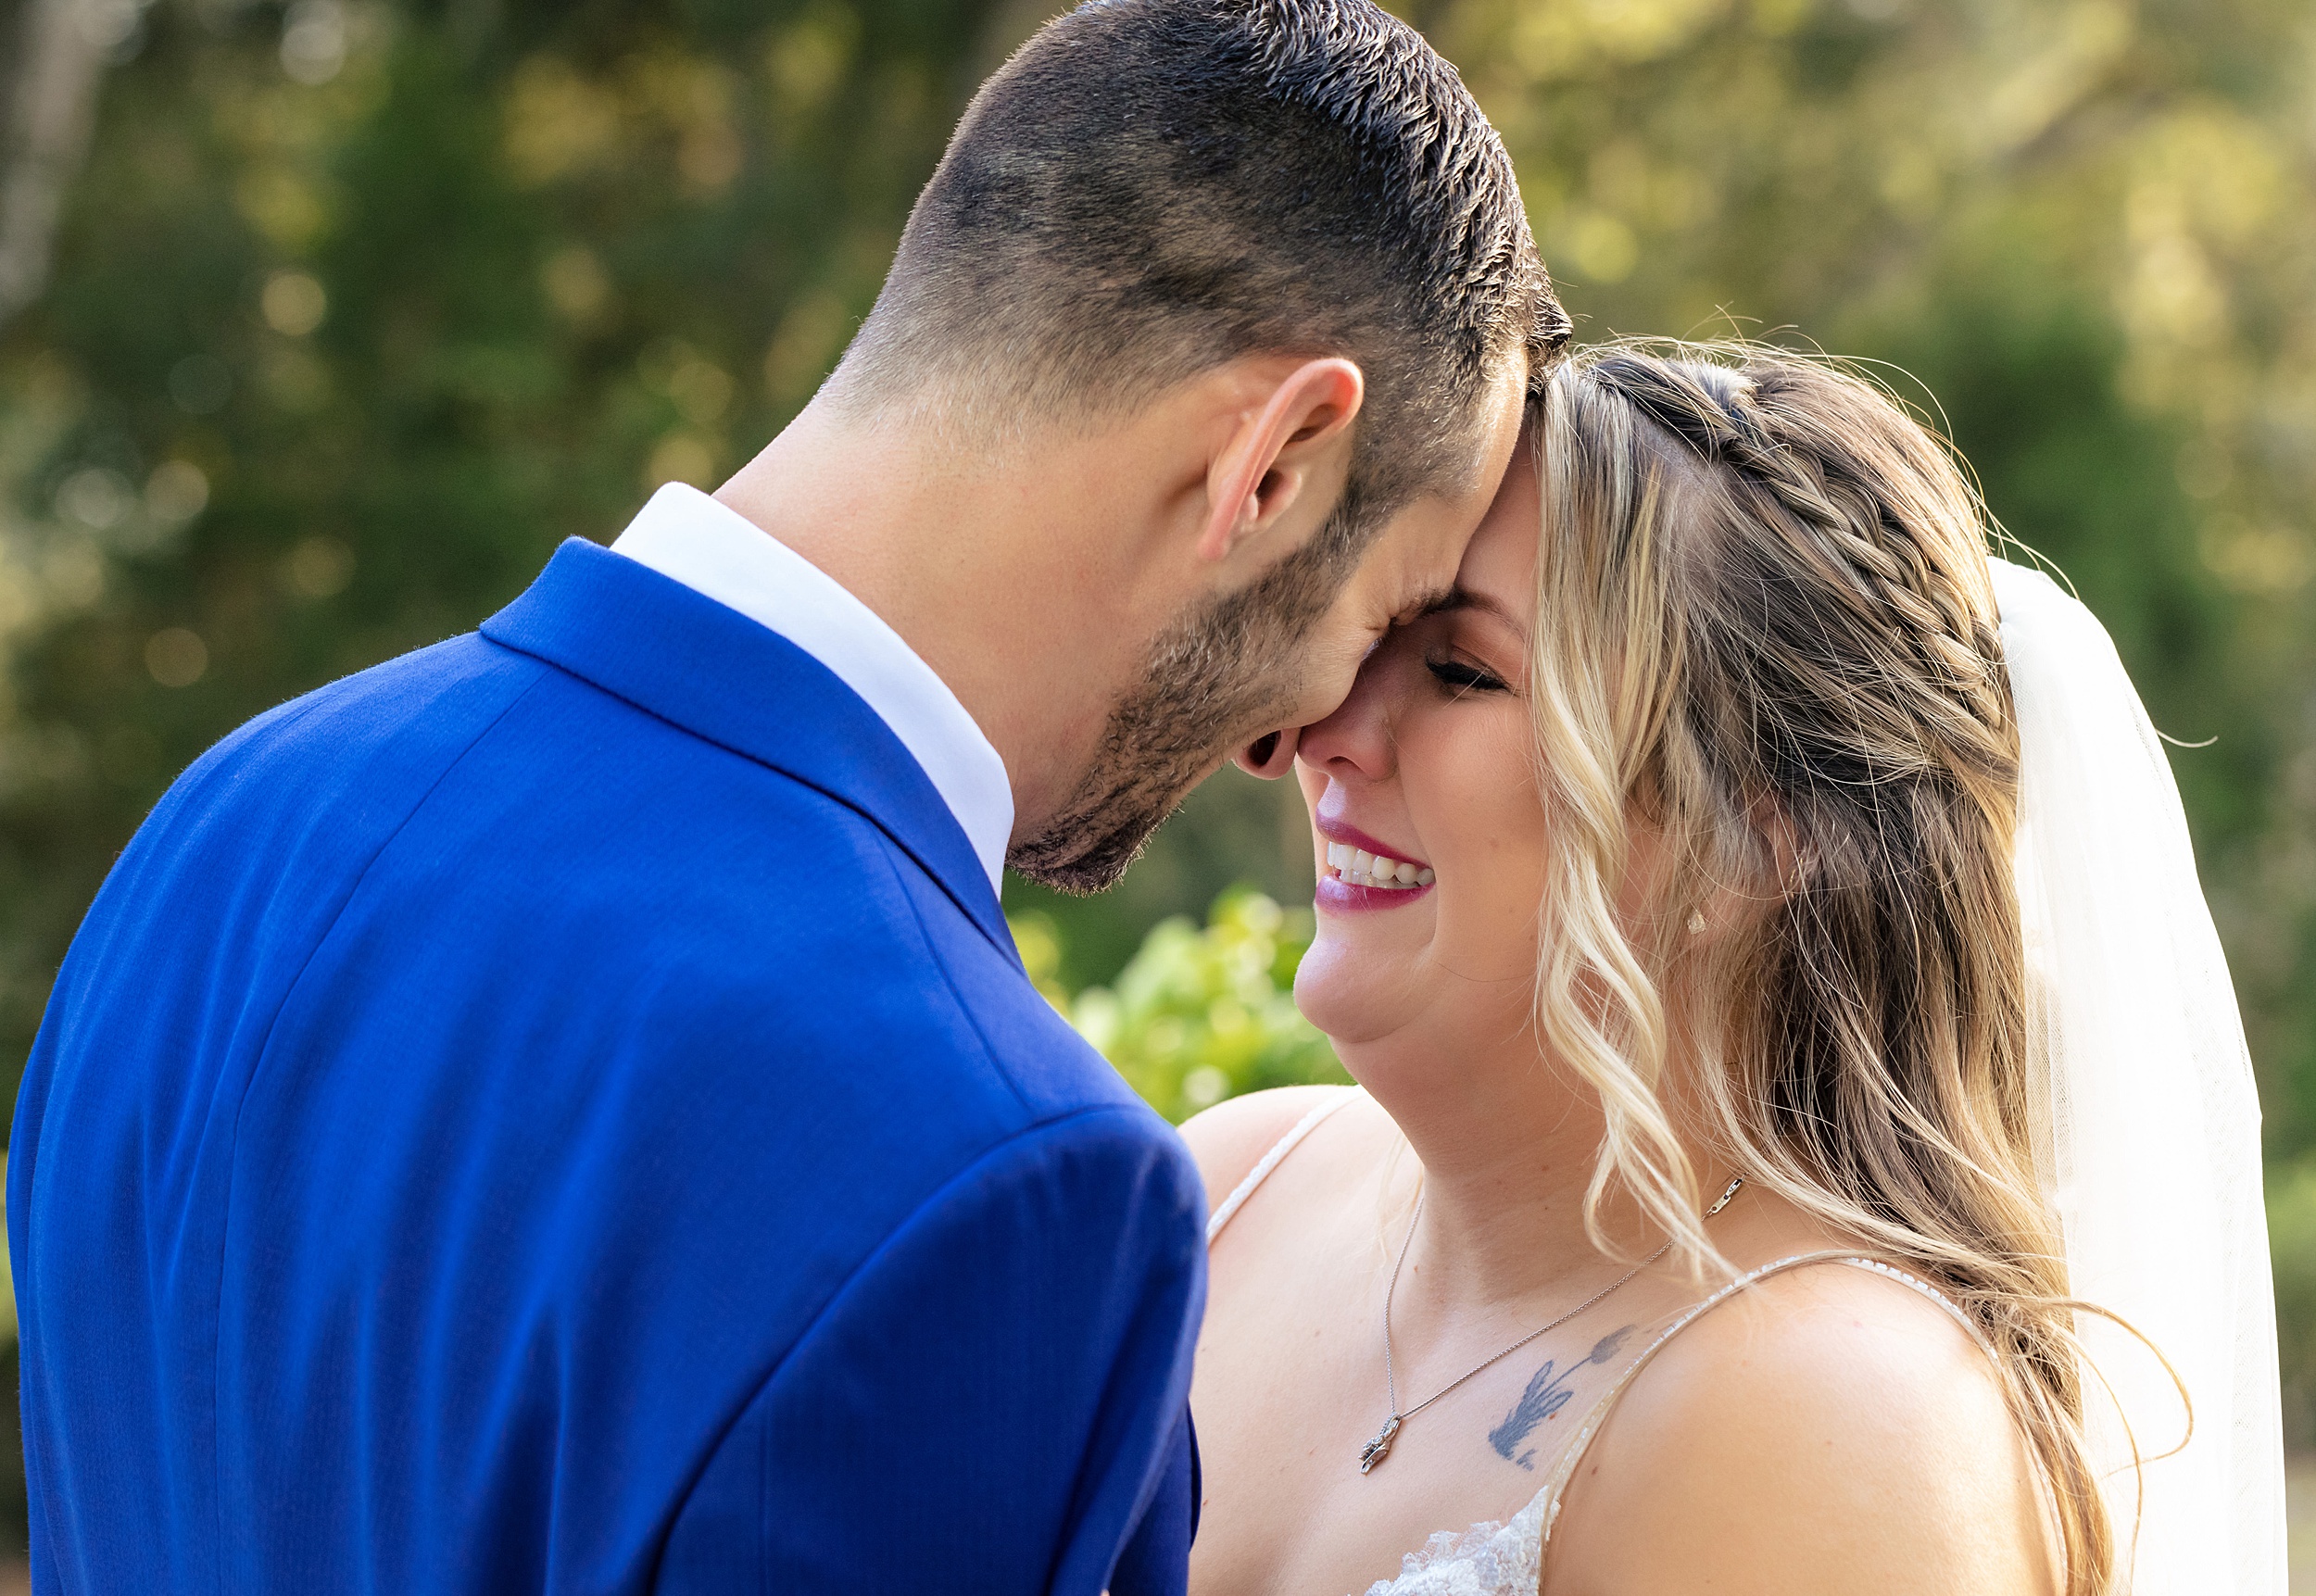 A groom in a blue suit touches foreheads with his bride in a lace dress